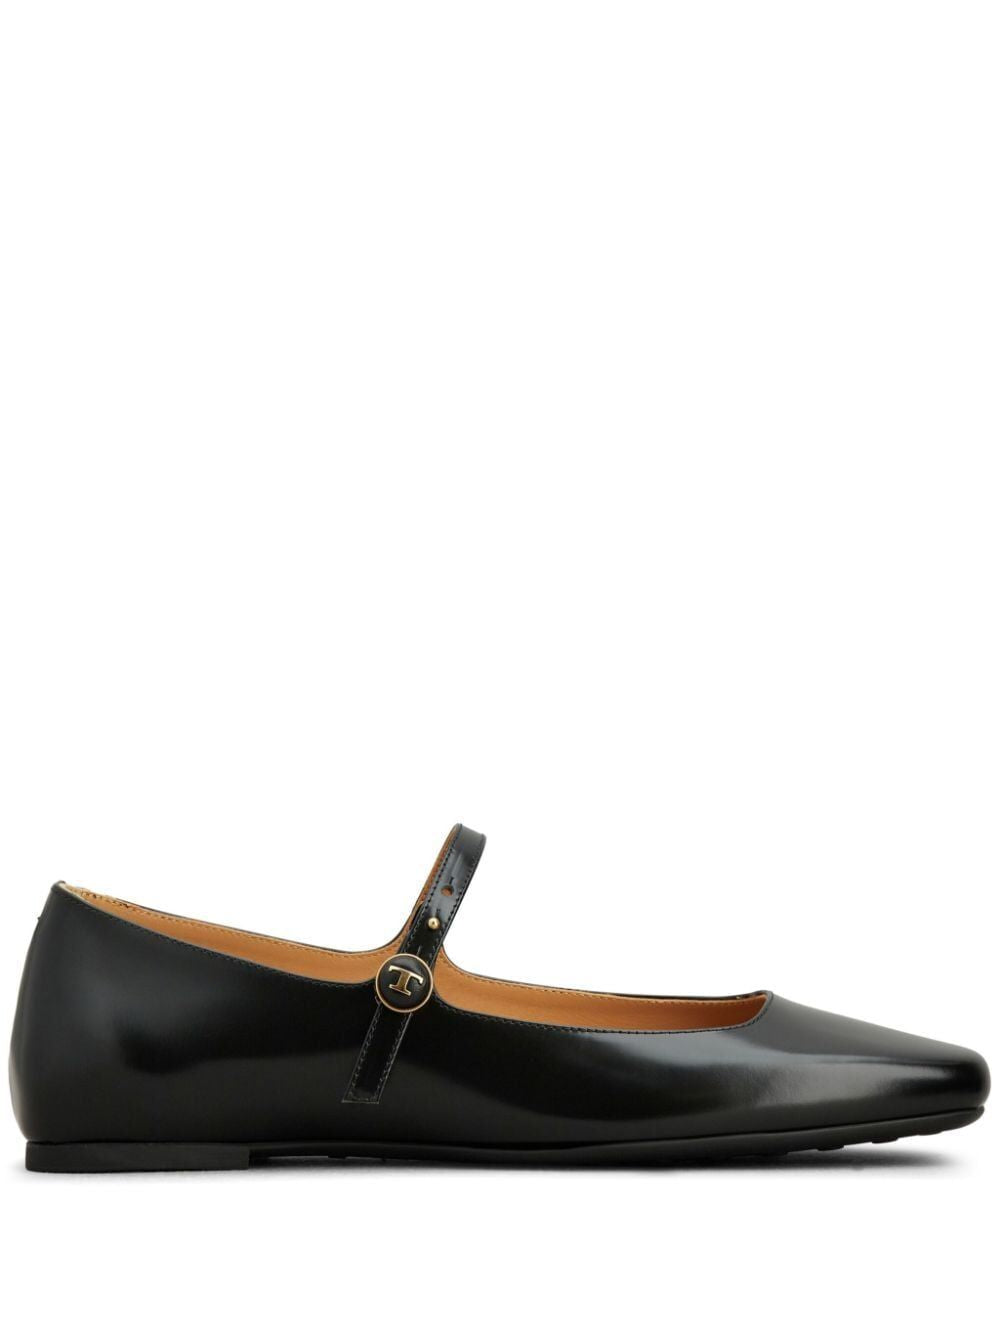 TOD'S PATENTLEATHER BALLERINA SHOES